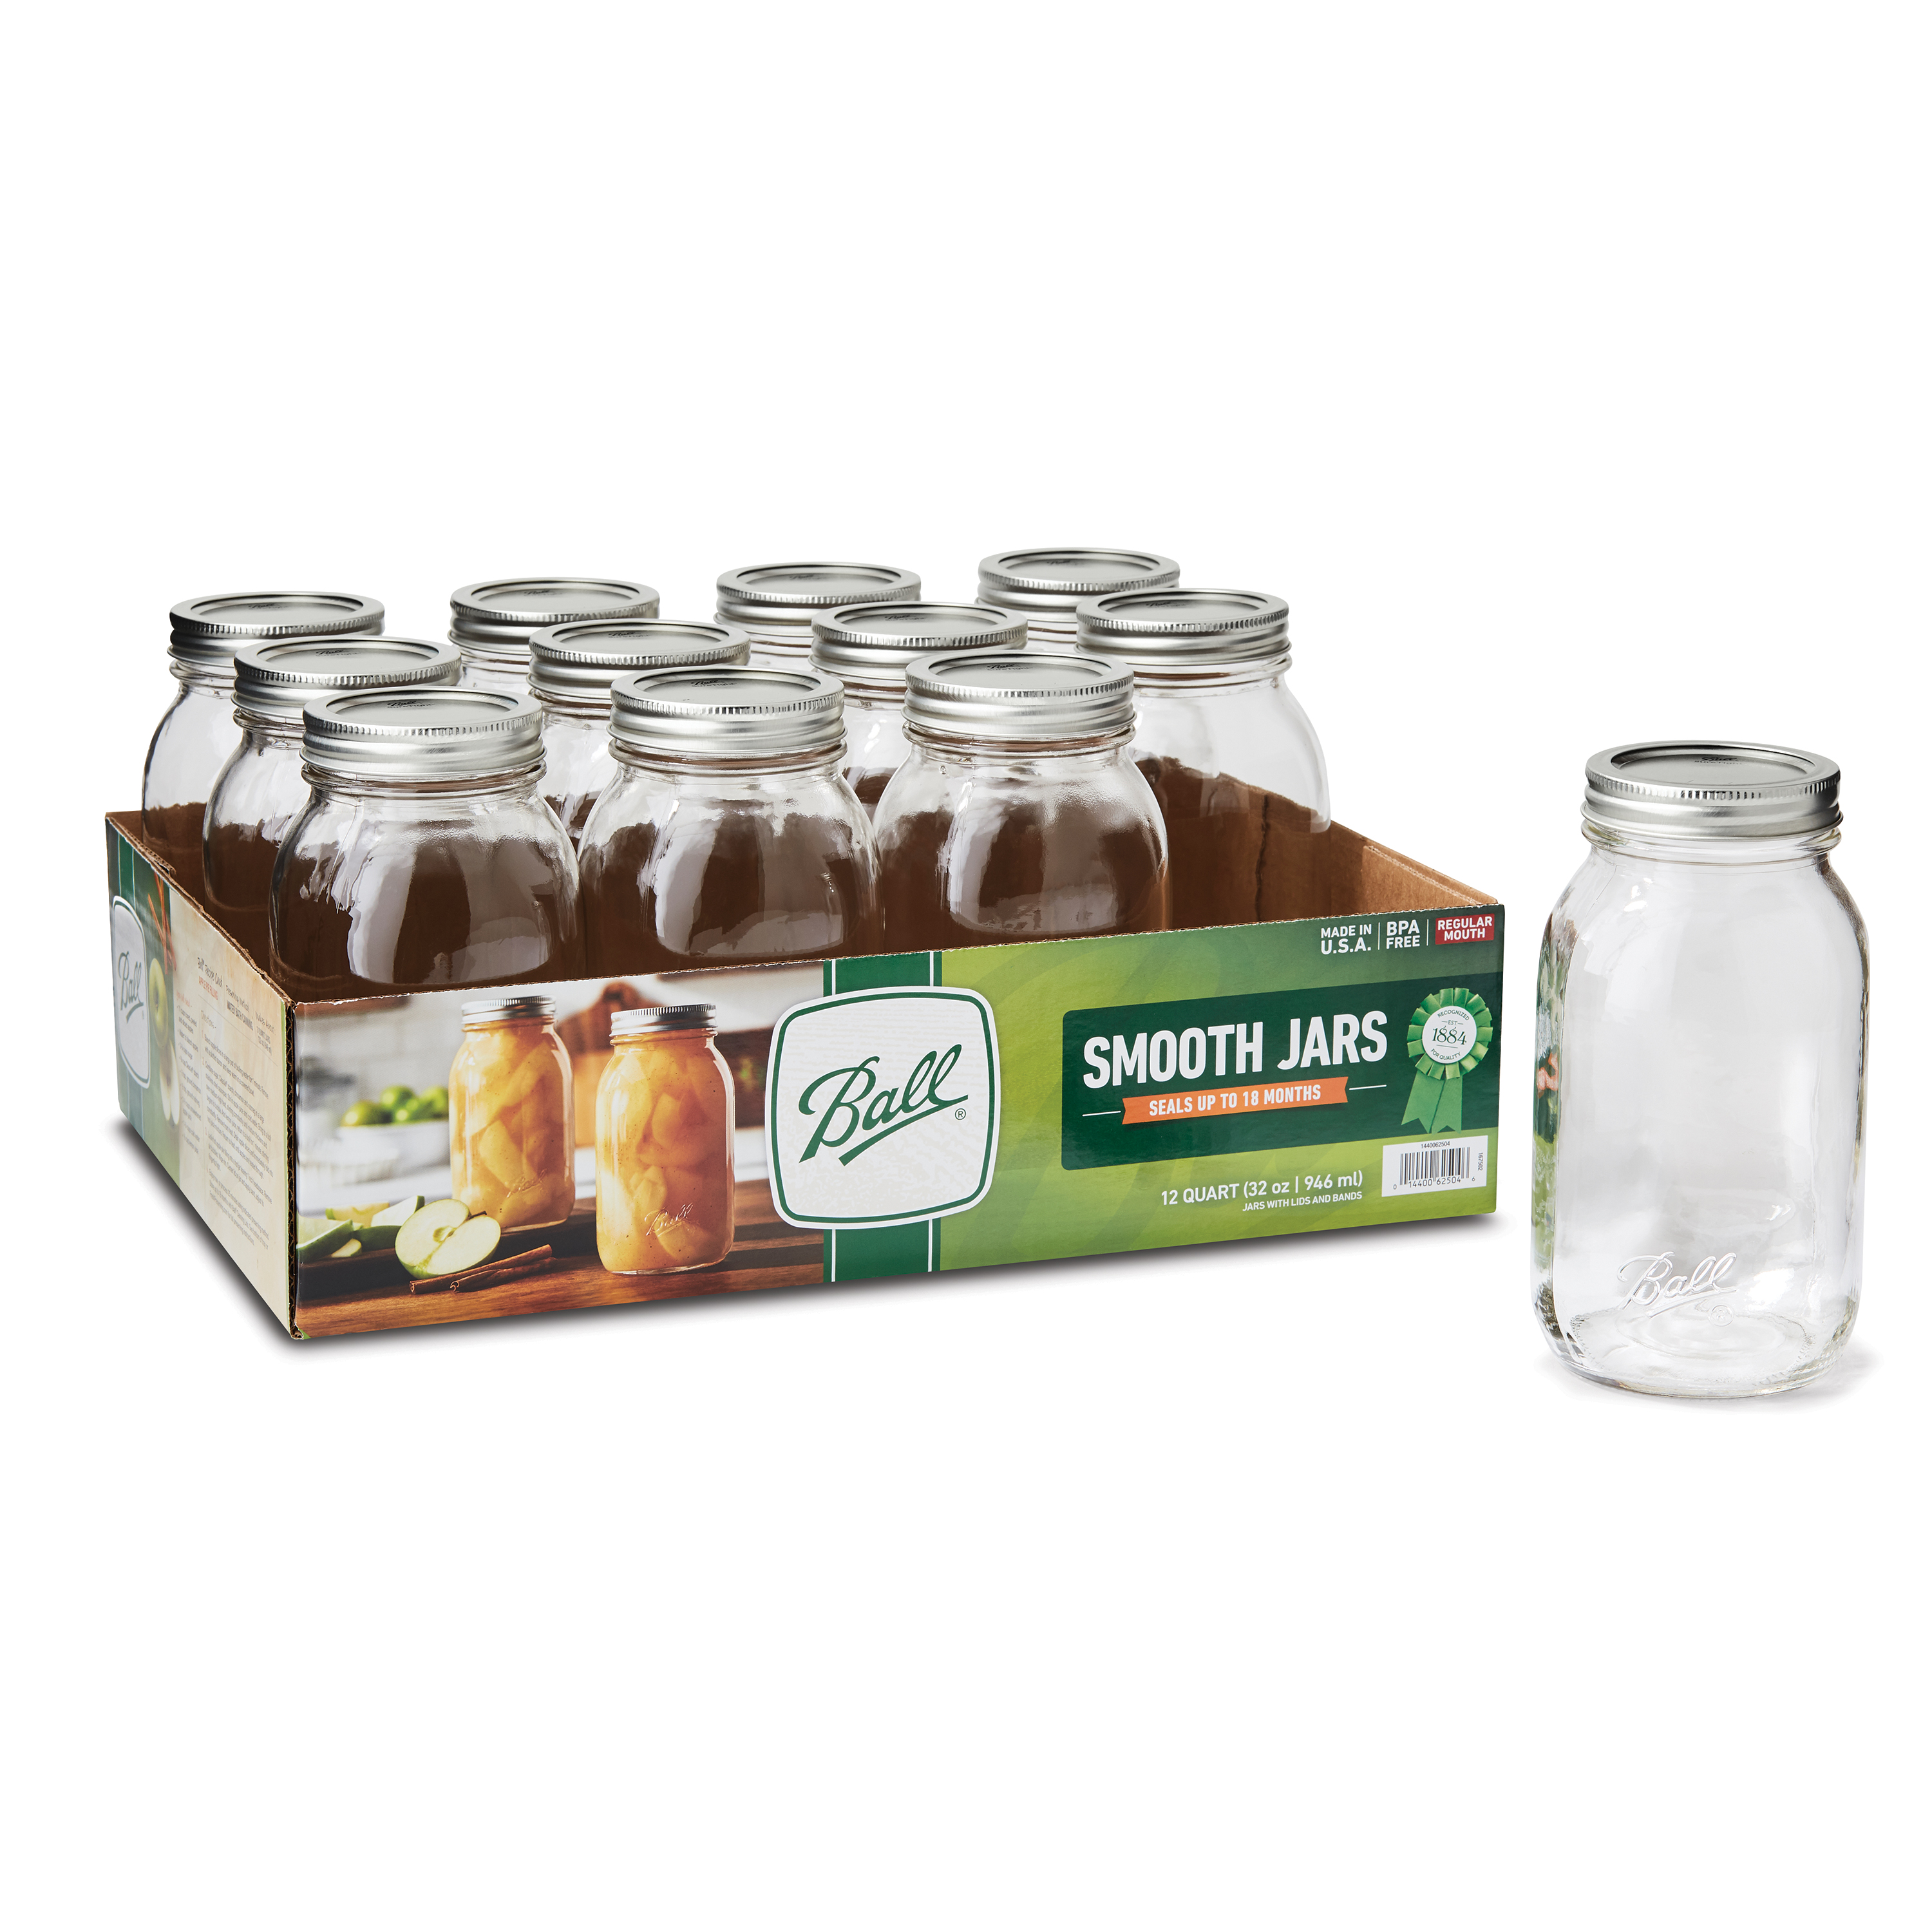 Ball, Smooth Sided Glass Mason Jars with Lids & Bands, Regular Mouth, 32 oz, 12 Count - image 1 of 4